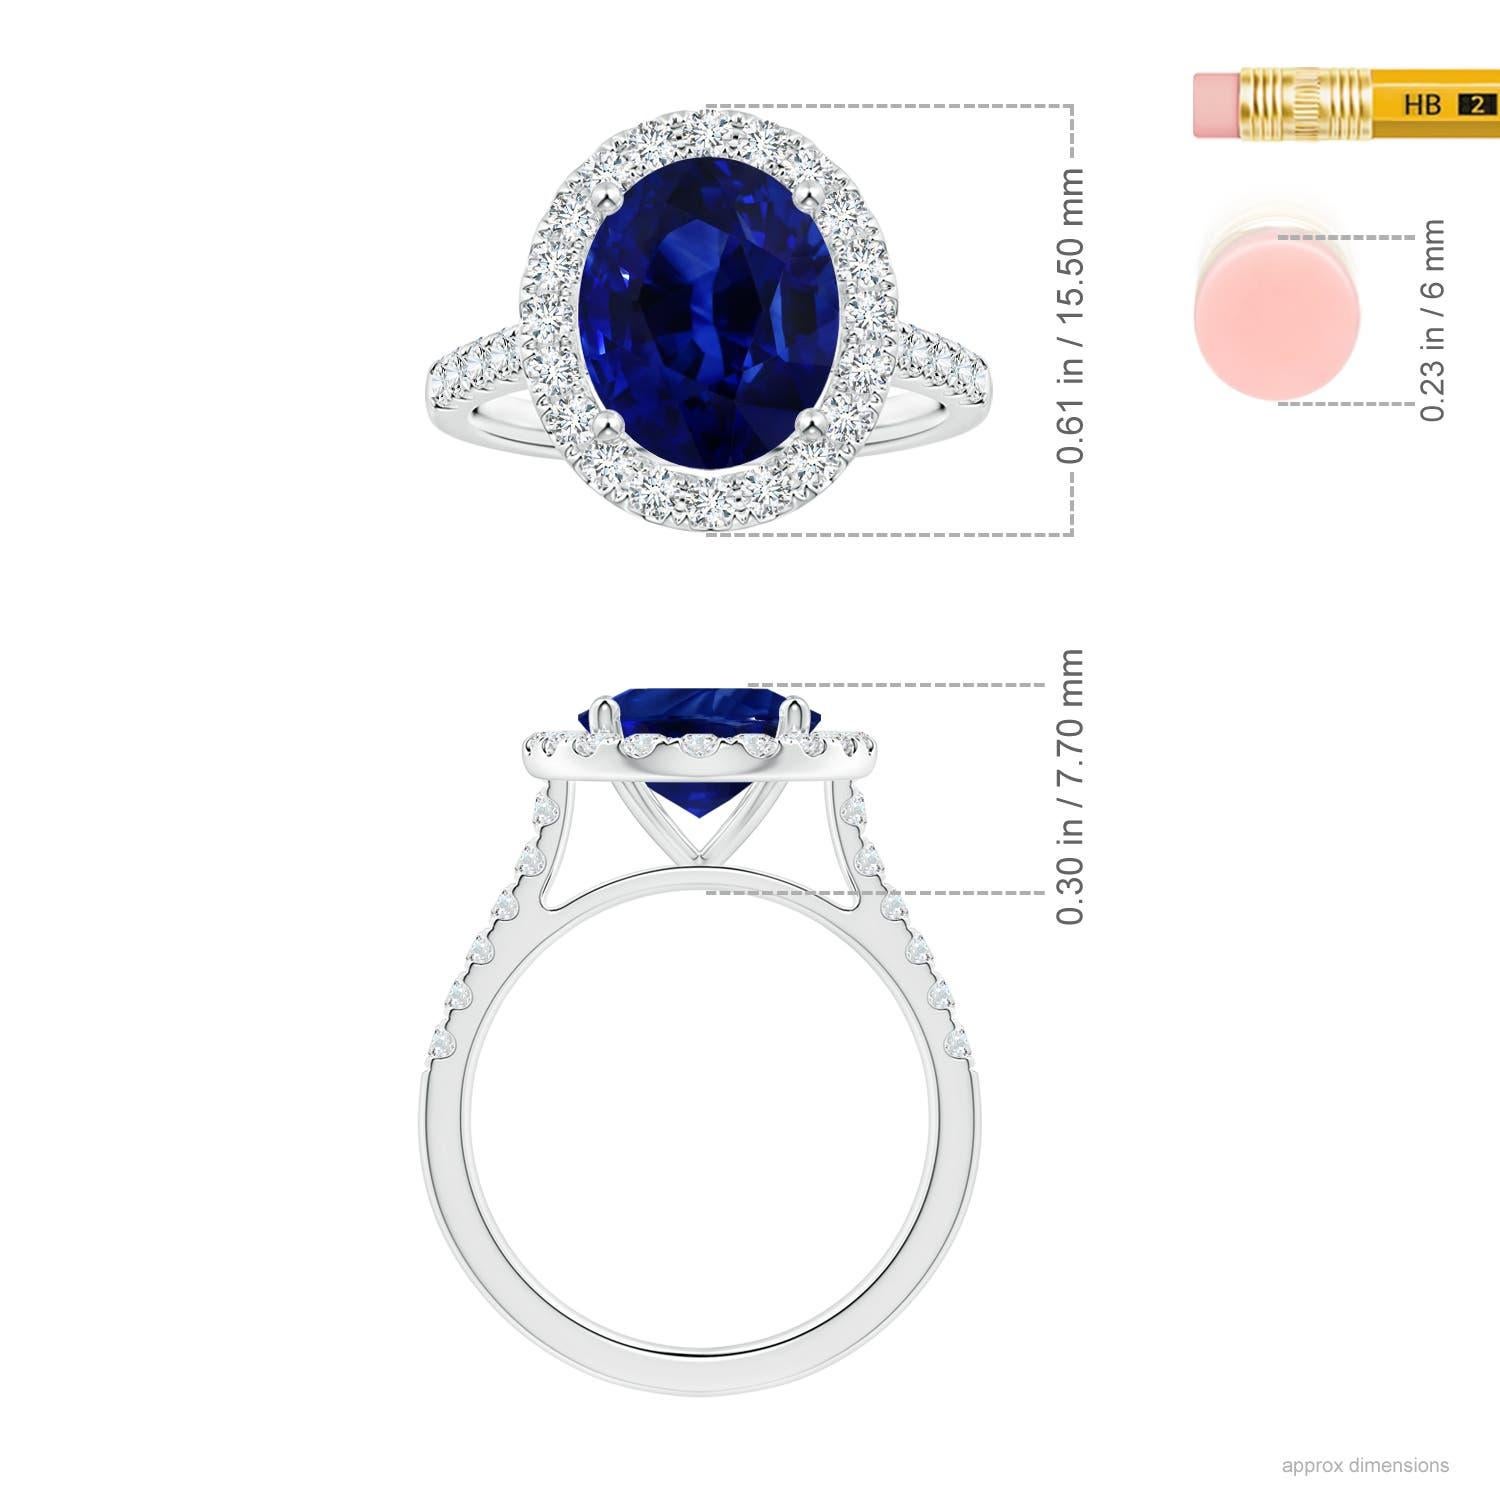 For Sale:  Angara Gia Certified Natural Blue Sapphire Halo Ring in Platinum with Diamonds 5